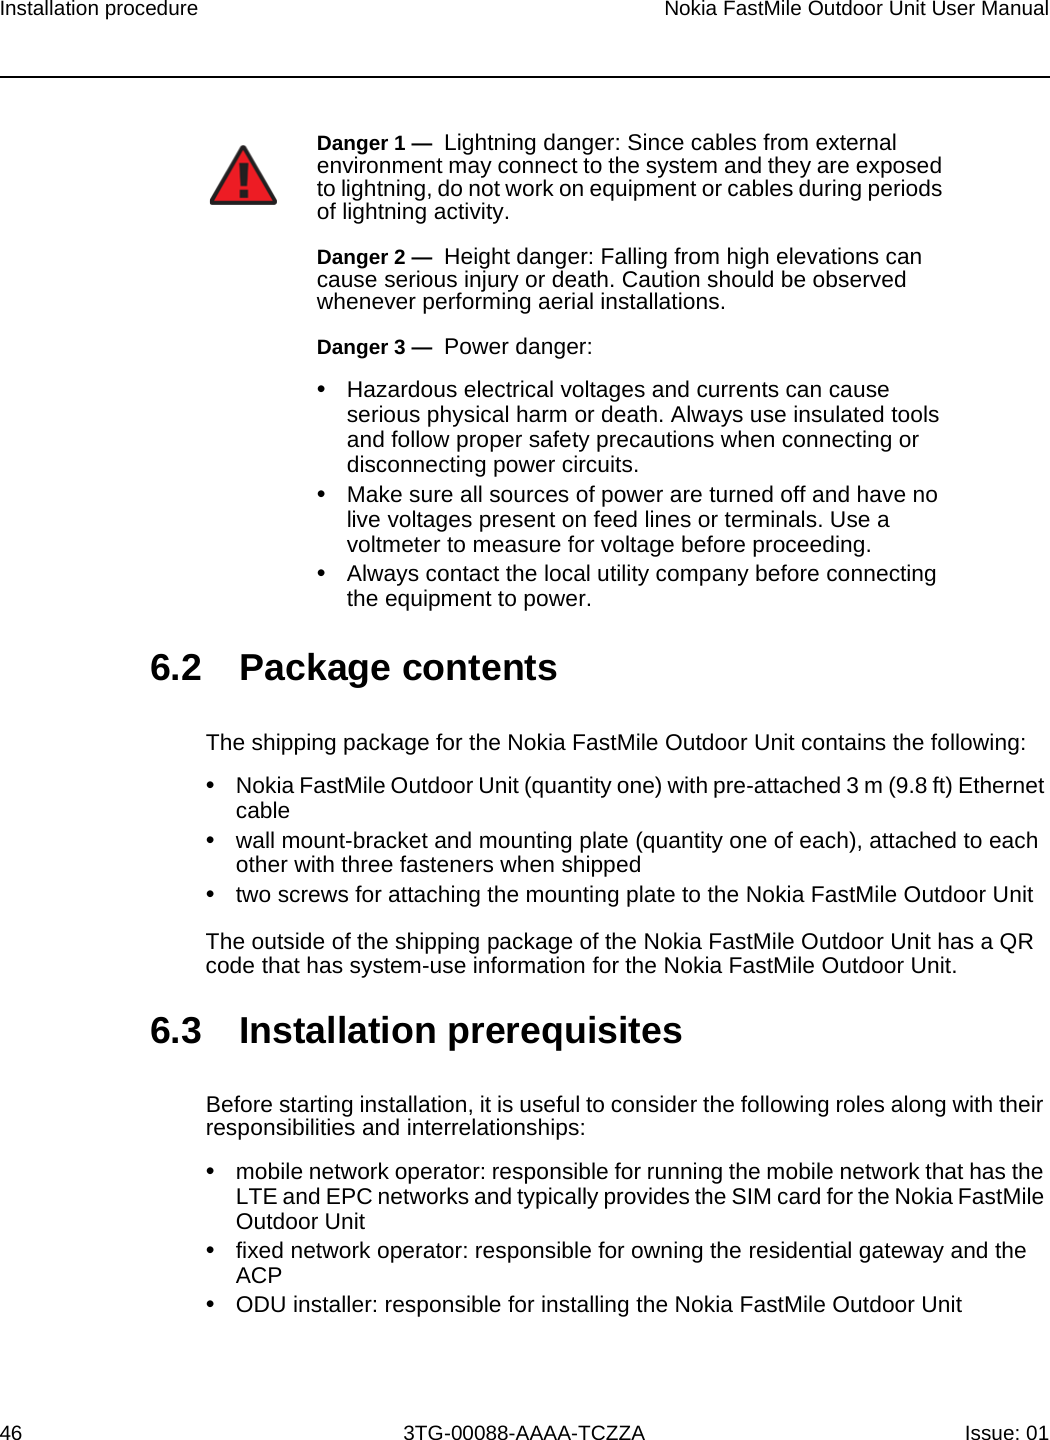 Installation procedure46Nokia FastMile Outdoor Unit User Manual3TG-00088-AAAA-TCZZA Issue: 01 6.2 Package contentsThe shipping package for the Nokia FastMile Outdoor Unit contains the following:•Nokia FastMile Outdoor Unit (quantity one) with pre-attached 3 m (9.8 ft) Ethernet cable•wall mount-bracket and mounting plate (quantity one of each), attached to each other with three fasteners when shipped•two screws for attaching the mounting plate to the Nokia FastMile Outdoor UnitThe outside of the shipping package of the Nokia FastMile Outdoor Unit has a QR code that has system-use information for the Nokia FastMile Outdoor Unit.6.3 Installation prerequisites Before starting installation, it is useful to consider the following roles along with their responsibilities and interrelationships:•mobile network operator: responsible for running the mobile network that has the LTE and EPC networks and typically provides the SIM card for the Nokia FastMile Outdoor Unit•fixed network operator: responsible for owning the residential gateway and the ACP•ODU installer: responsible for installing the Nokia FastMile Outdoor UnitDanger 1 —  Lightning danger: Since cables from external environment may connect to the system and they are exposed to lightning, do not work on equipment or cables during periods of lightning activity.Danger 2 —  Height danger: Falling from high elevations can cause serious injury or death. Caution should be observed whenever performing aerial installations.Danger 3 —  Power danger: •Hazardous electrical voltages and currents can cause serious physical harm or death. Always use insulated tools and follow proper safety precautions when connecting or disconnecting power circuits.•Make sure all sources of power are turned off and have no live voltages present on feed lines or terminals. Use a voltmeter to measure for voltage before proceeding.•Always contact the local utility company before connecting the equipment to power.